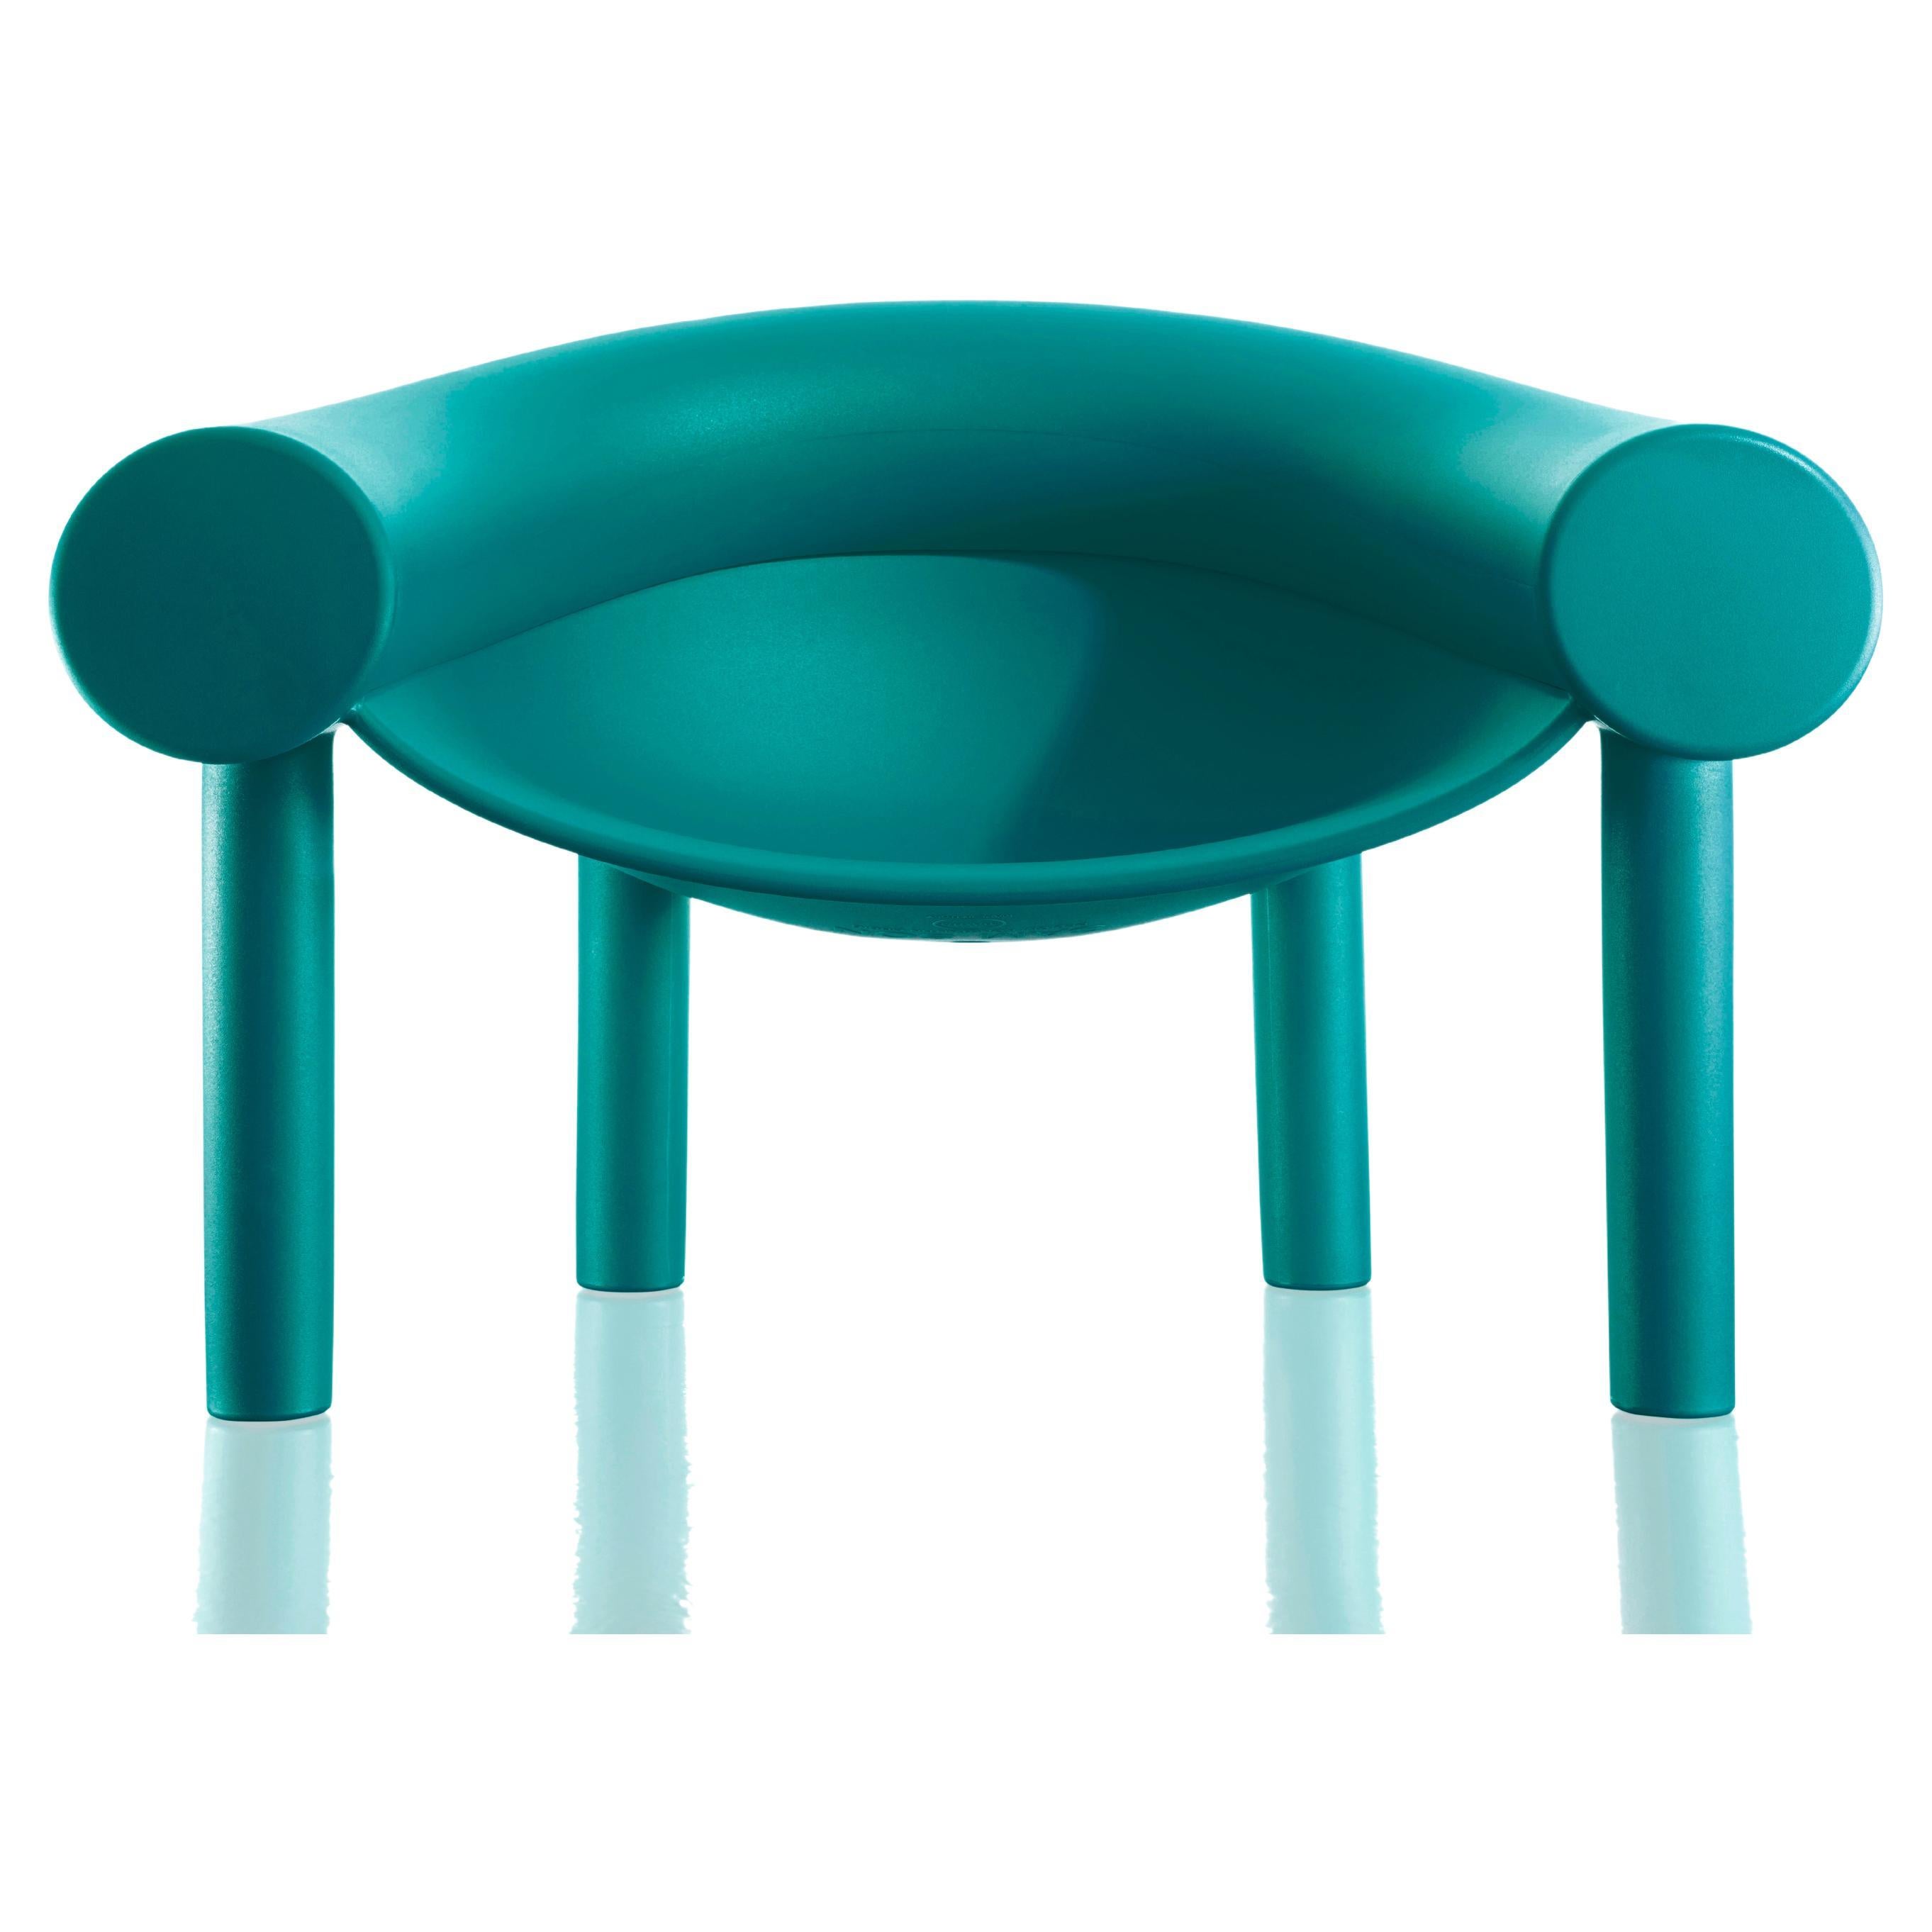 Sam Son Armchair in Petrol Blue by Konstantin Grcic for MAGIS For Sale